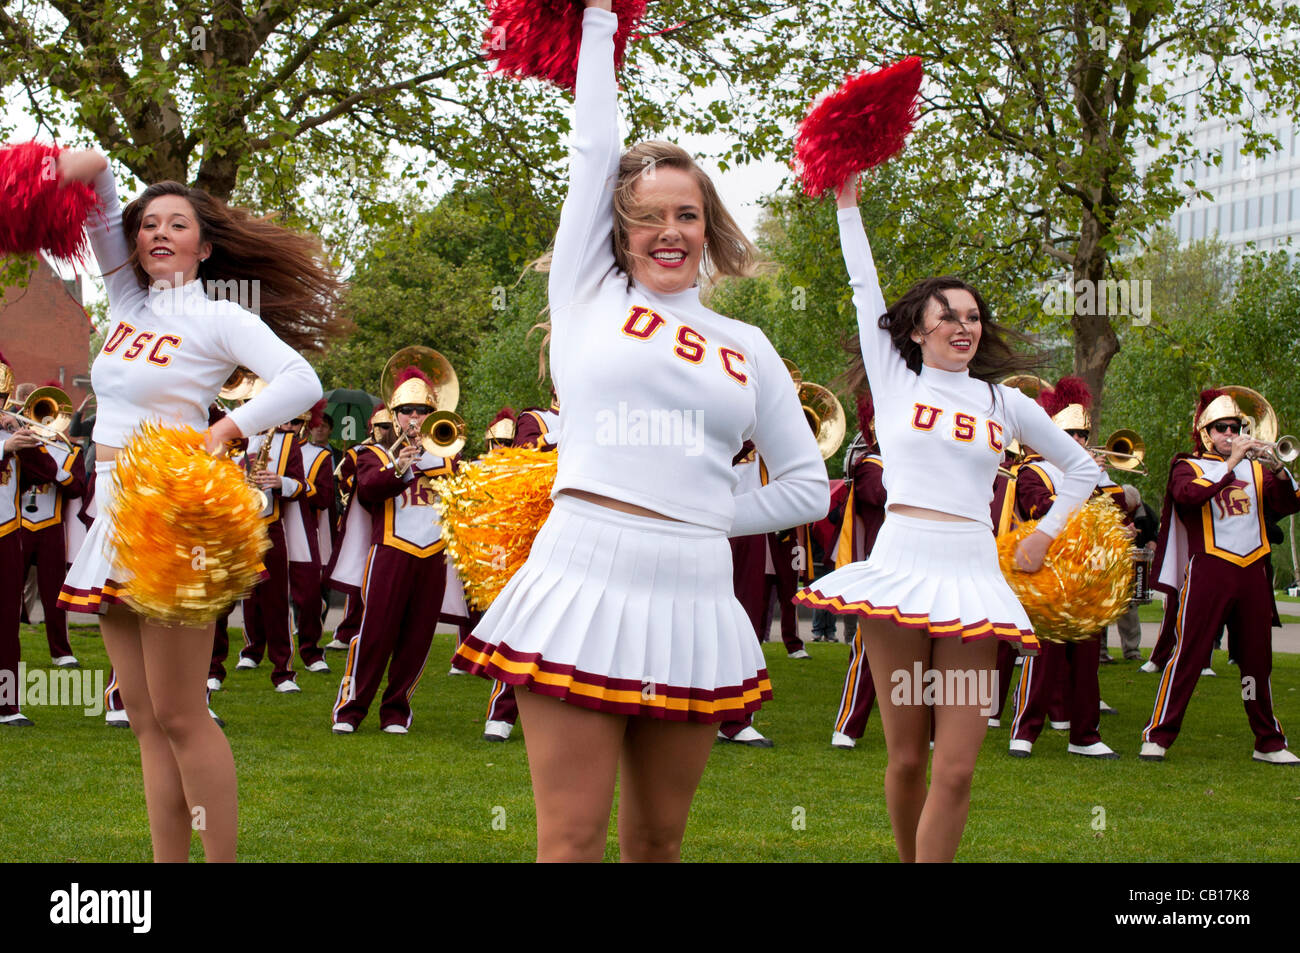 18 May 2012 London UK, The University of Southern California Trojans Marching Band show off their skills but fail to bring the s Stock Photo